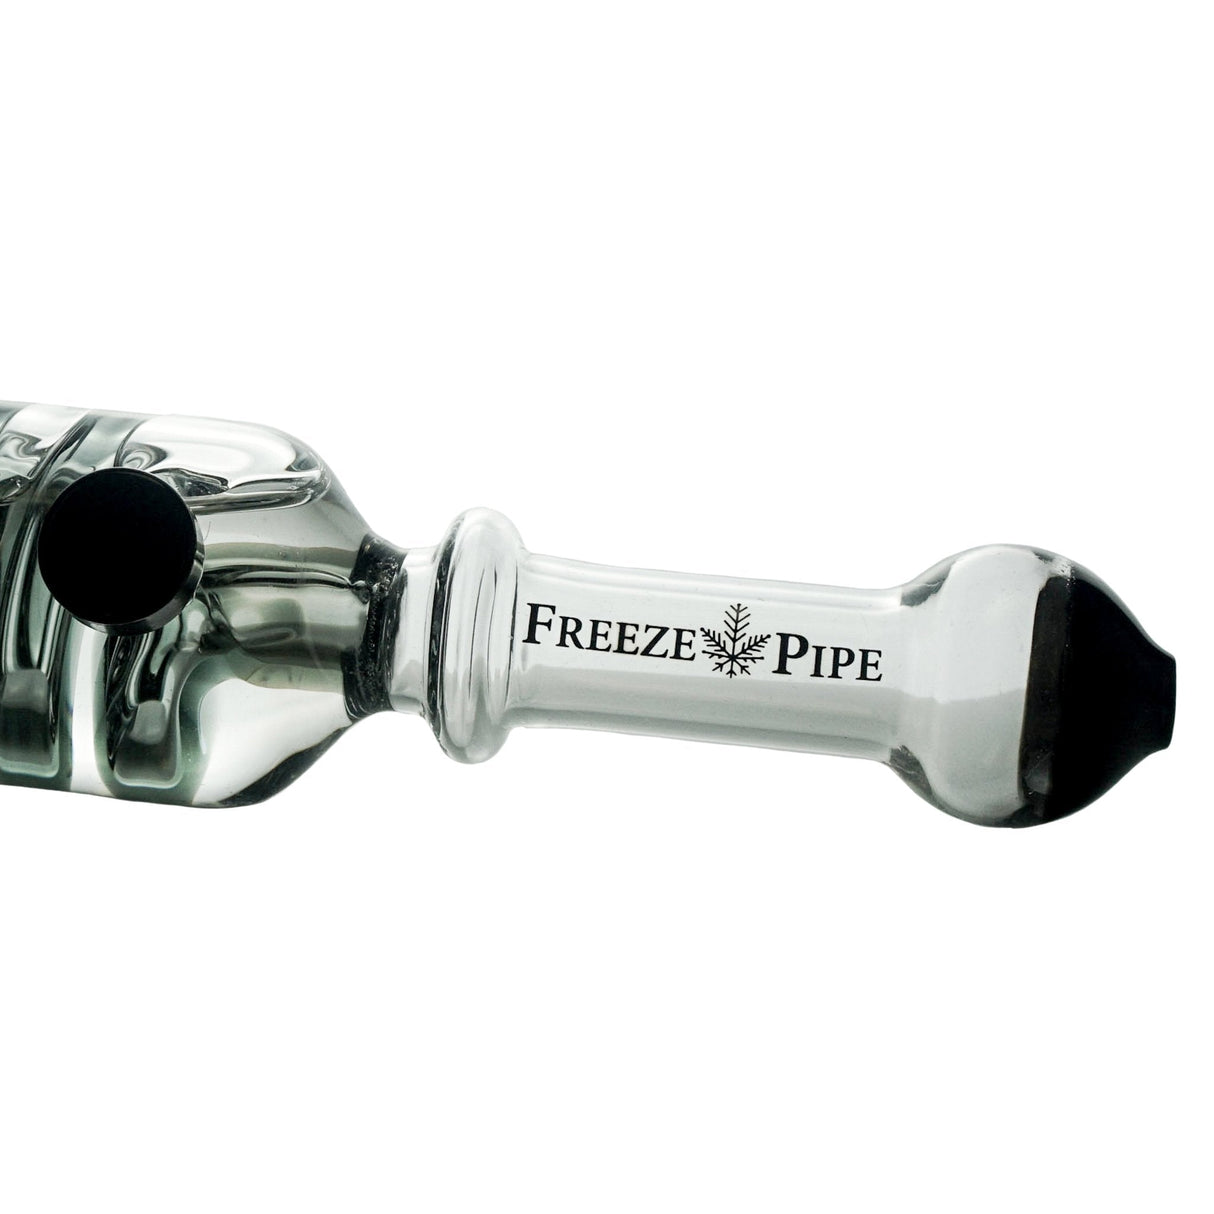 Freeze Pipe hand pipe with glycerin chamber for cool smoke, side view on white background